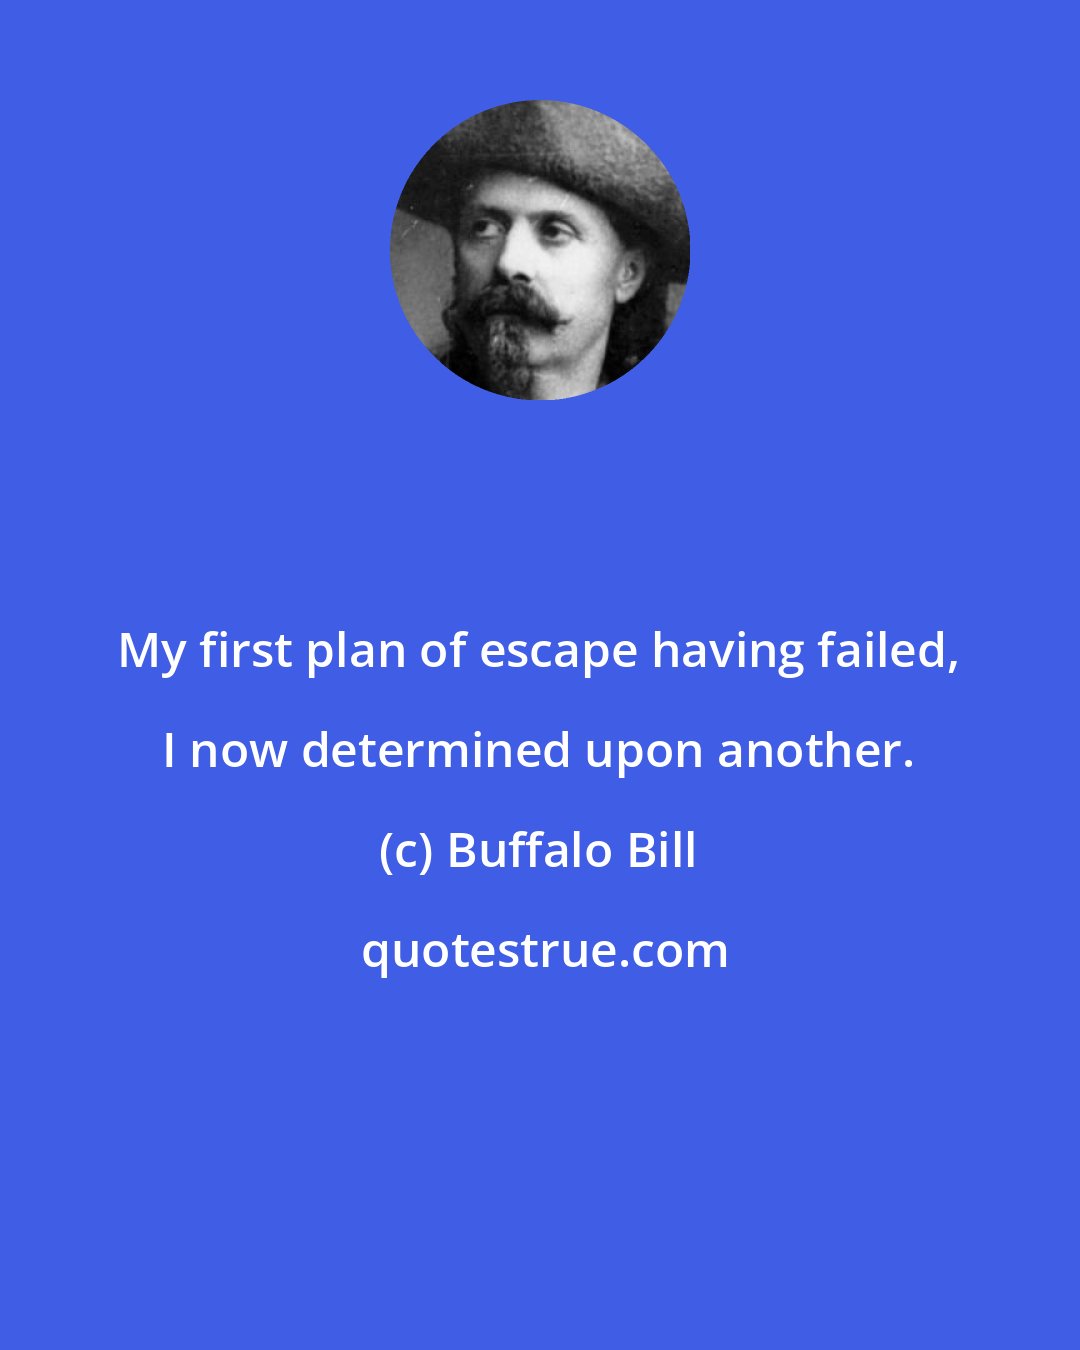 Buffalo Bill: My first plan of escape having failed, I now determined upon another.